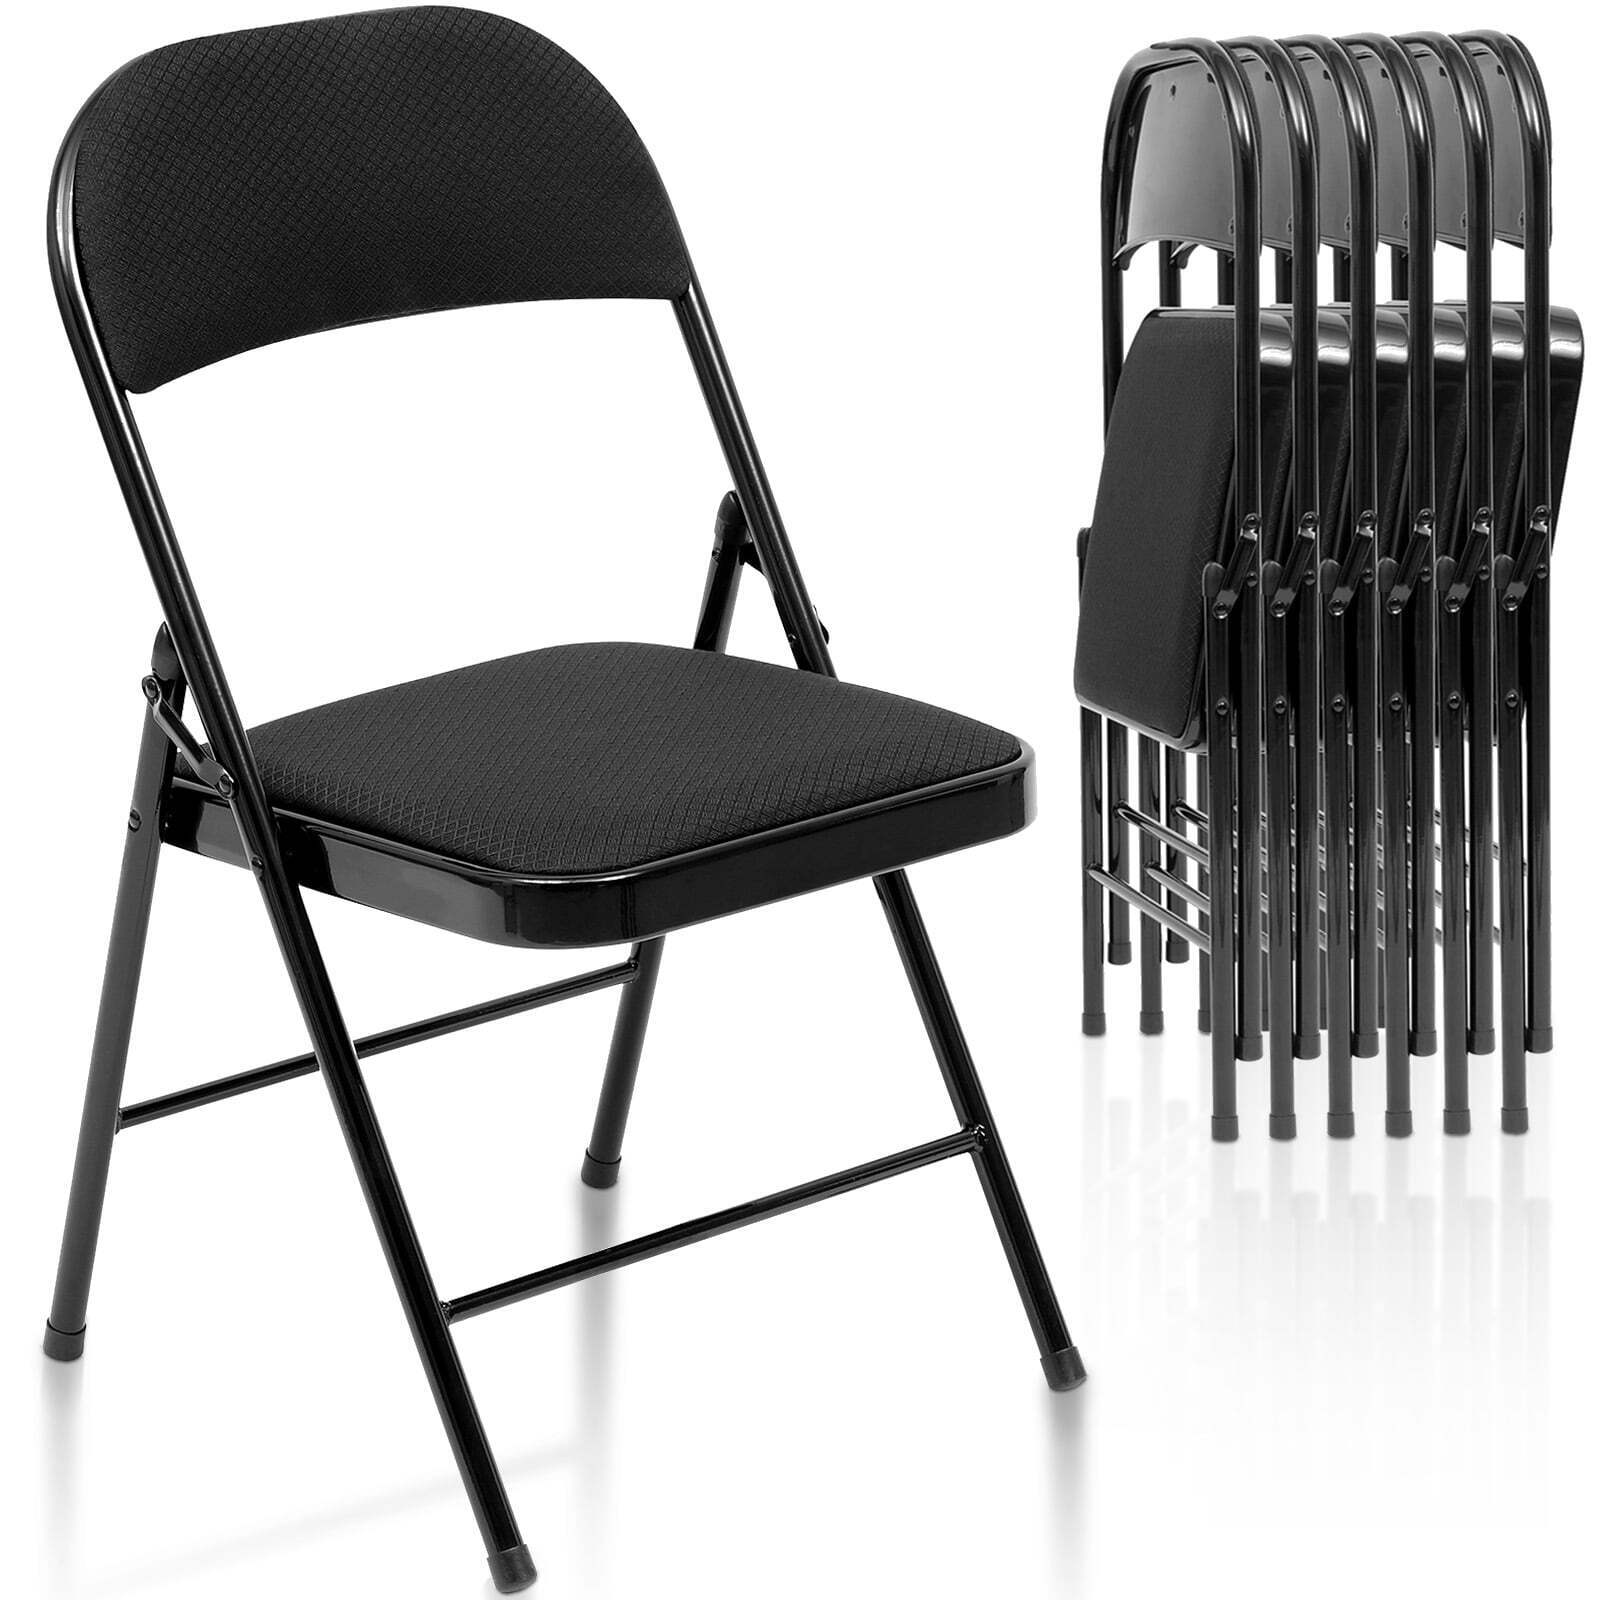 Fabric Upholstered Folding Chairs 6 Pack, Black